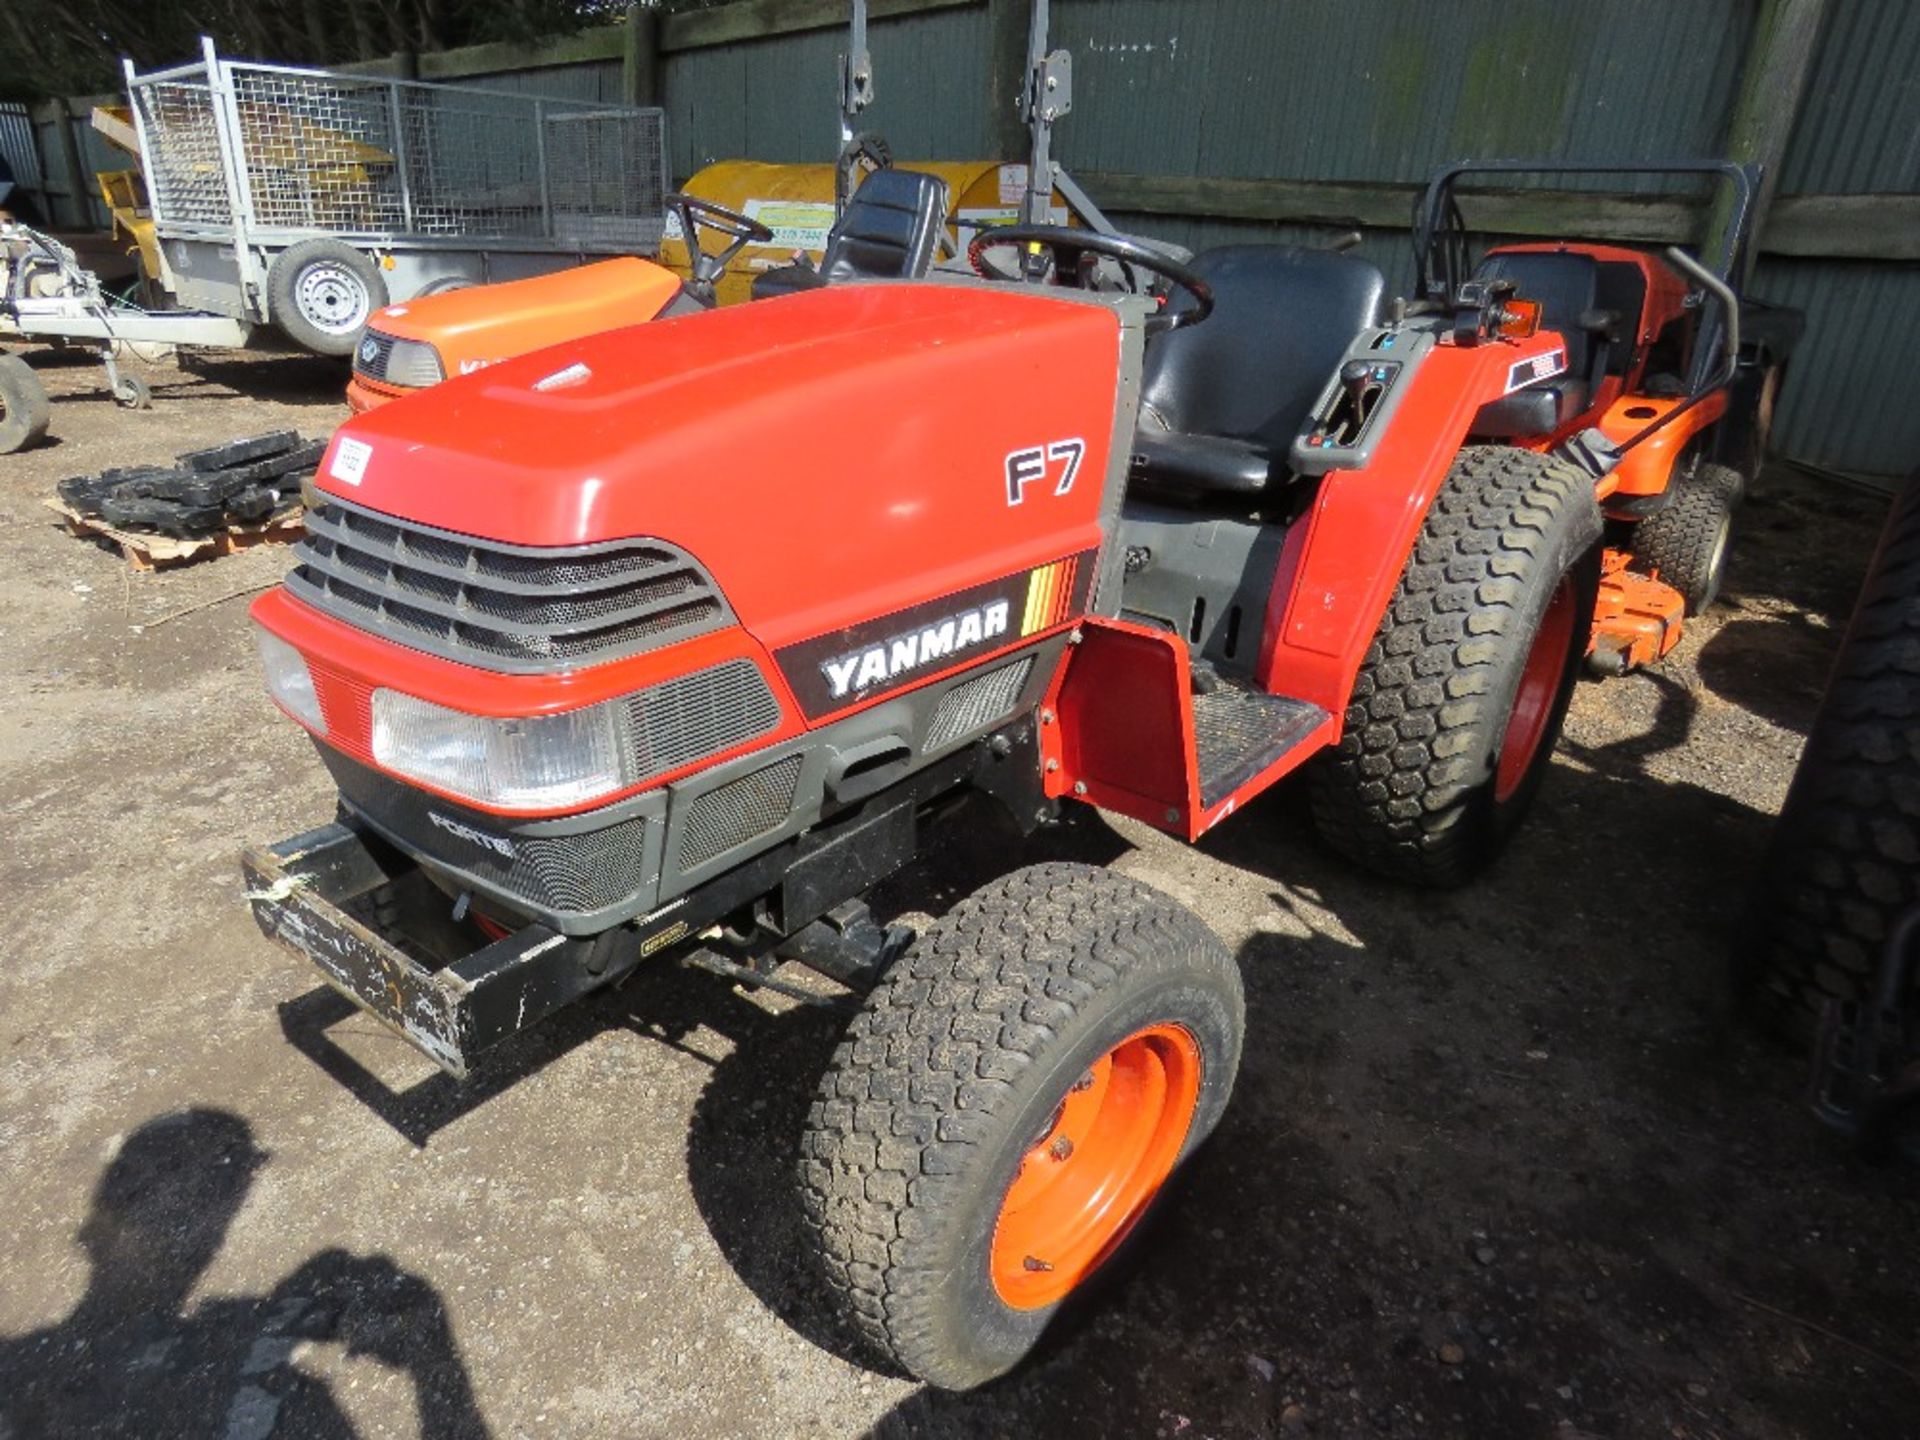 YANMAR F7 COMPACT TRACTOR ON GRASS TYRES. 125 REC HRS. WHEN TESTED WAS SEEN TO RUN, DRIVE, STEER AND - Image 2 of 6